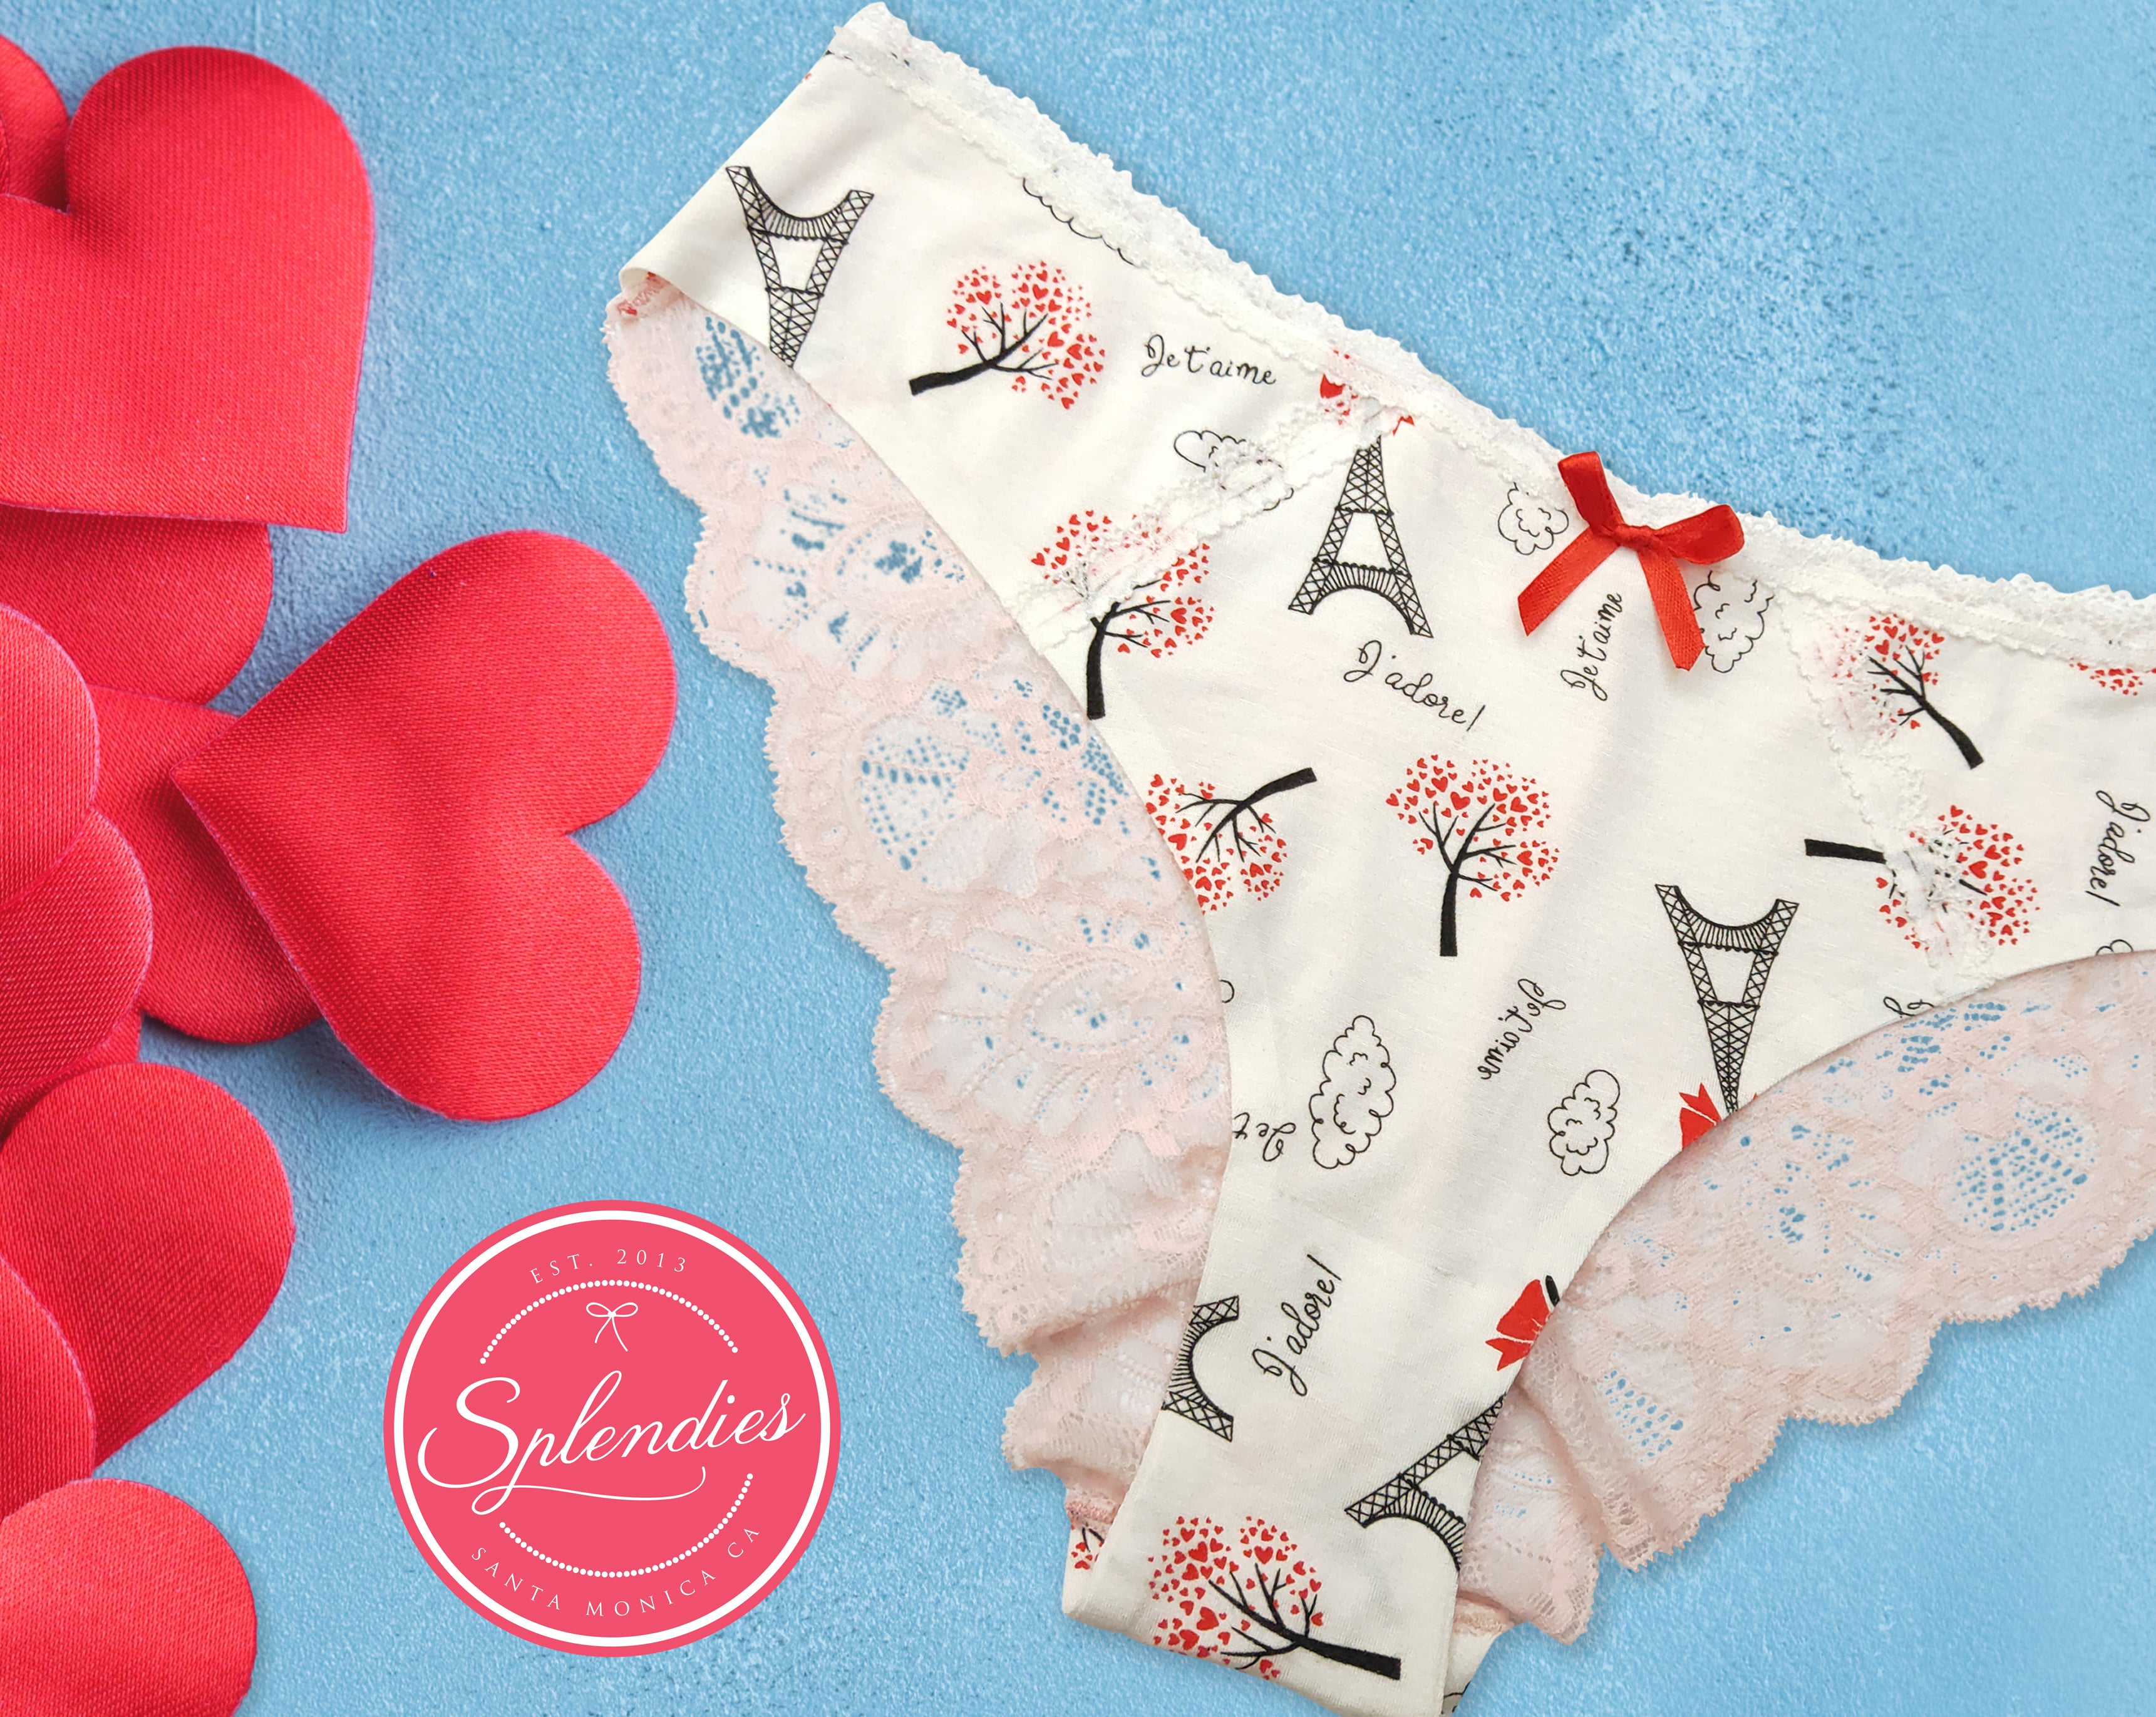 Special Valentine's Day Undies in January 2018 Splendies - I Heart You